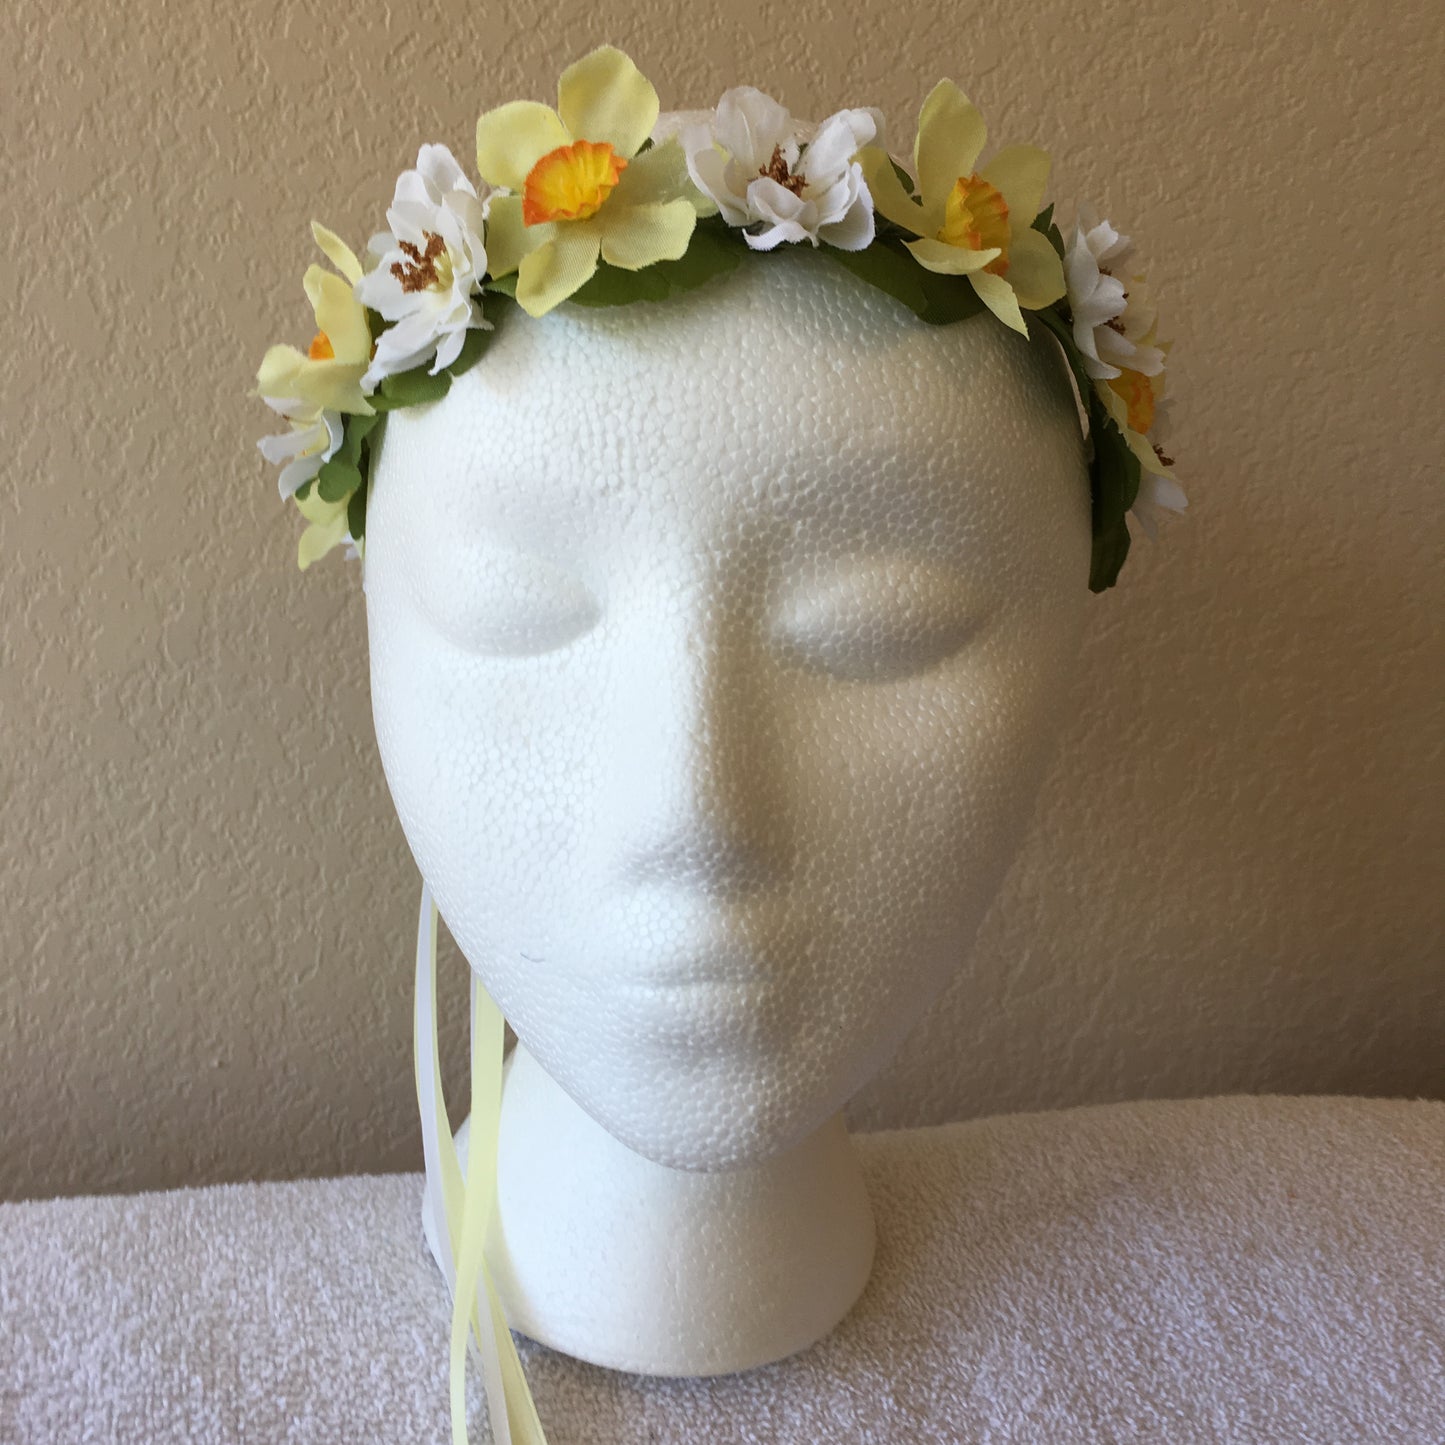 Extra Small Wreath - Yellow daffodils & accent flowers +